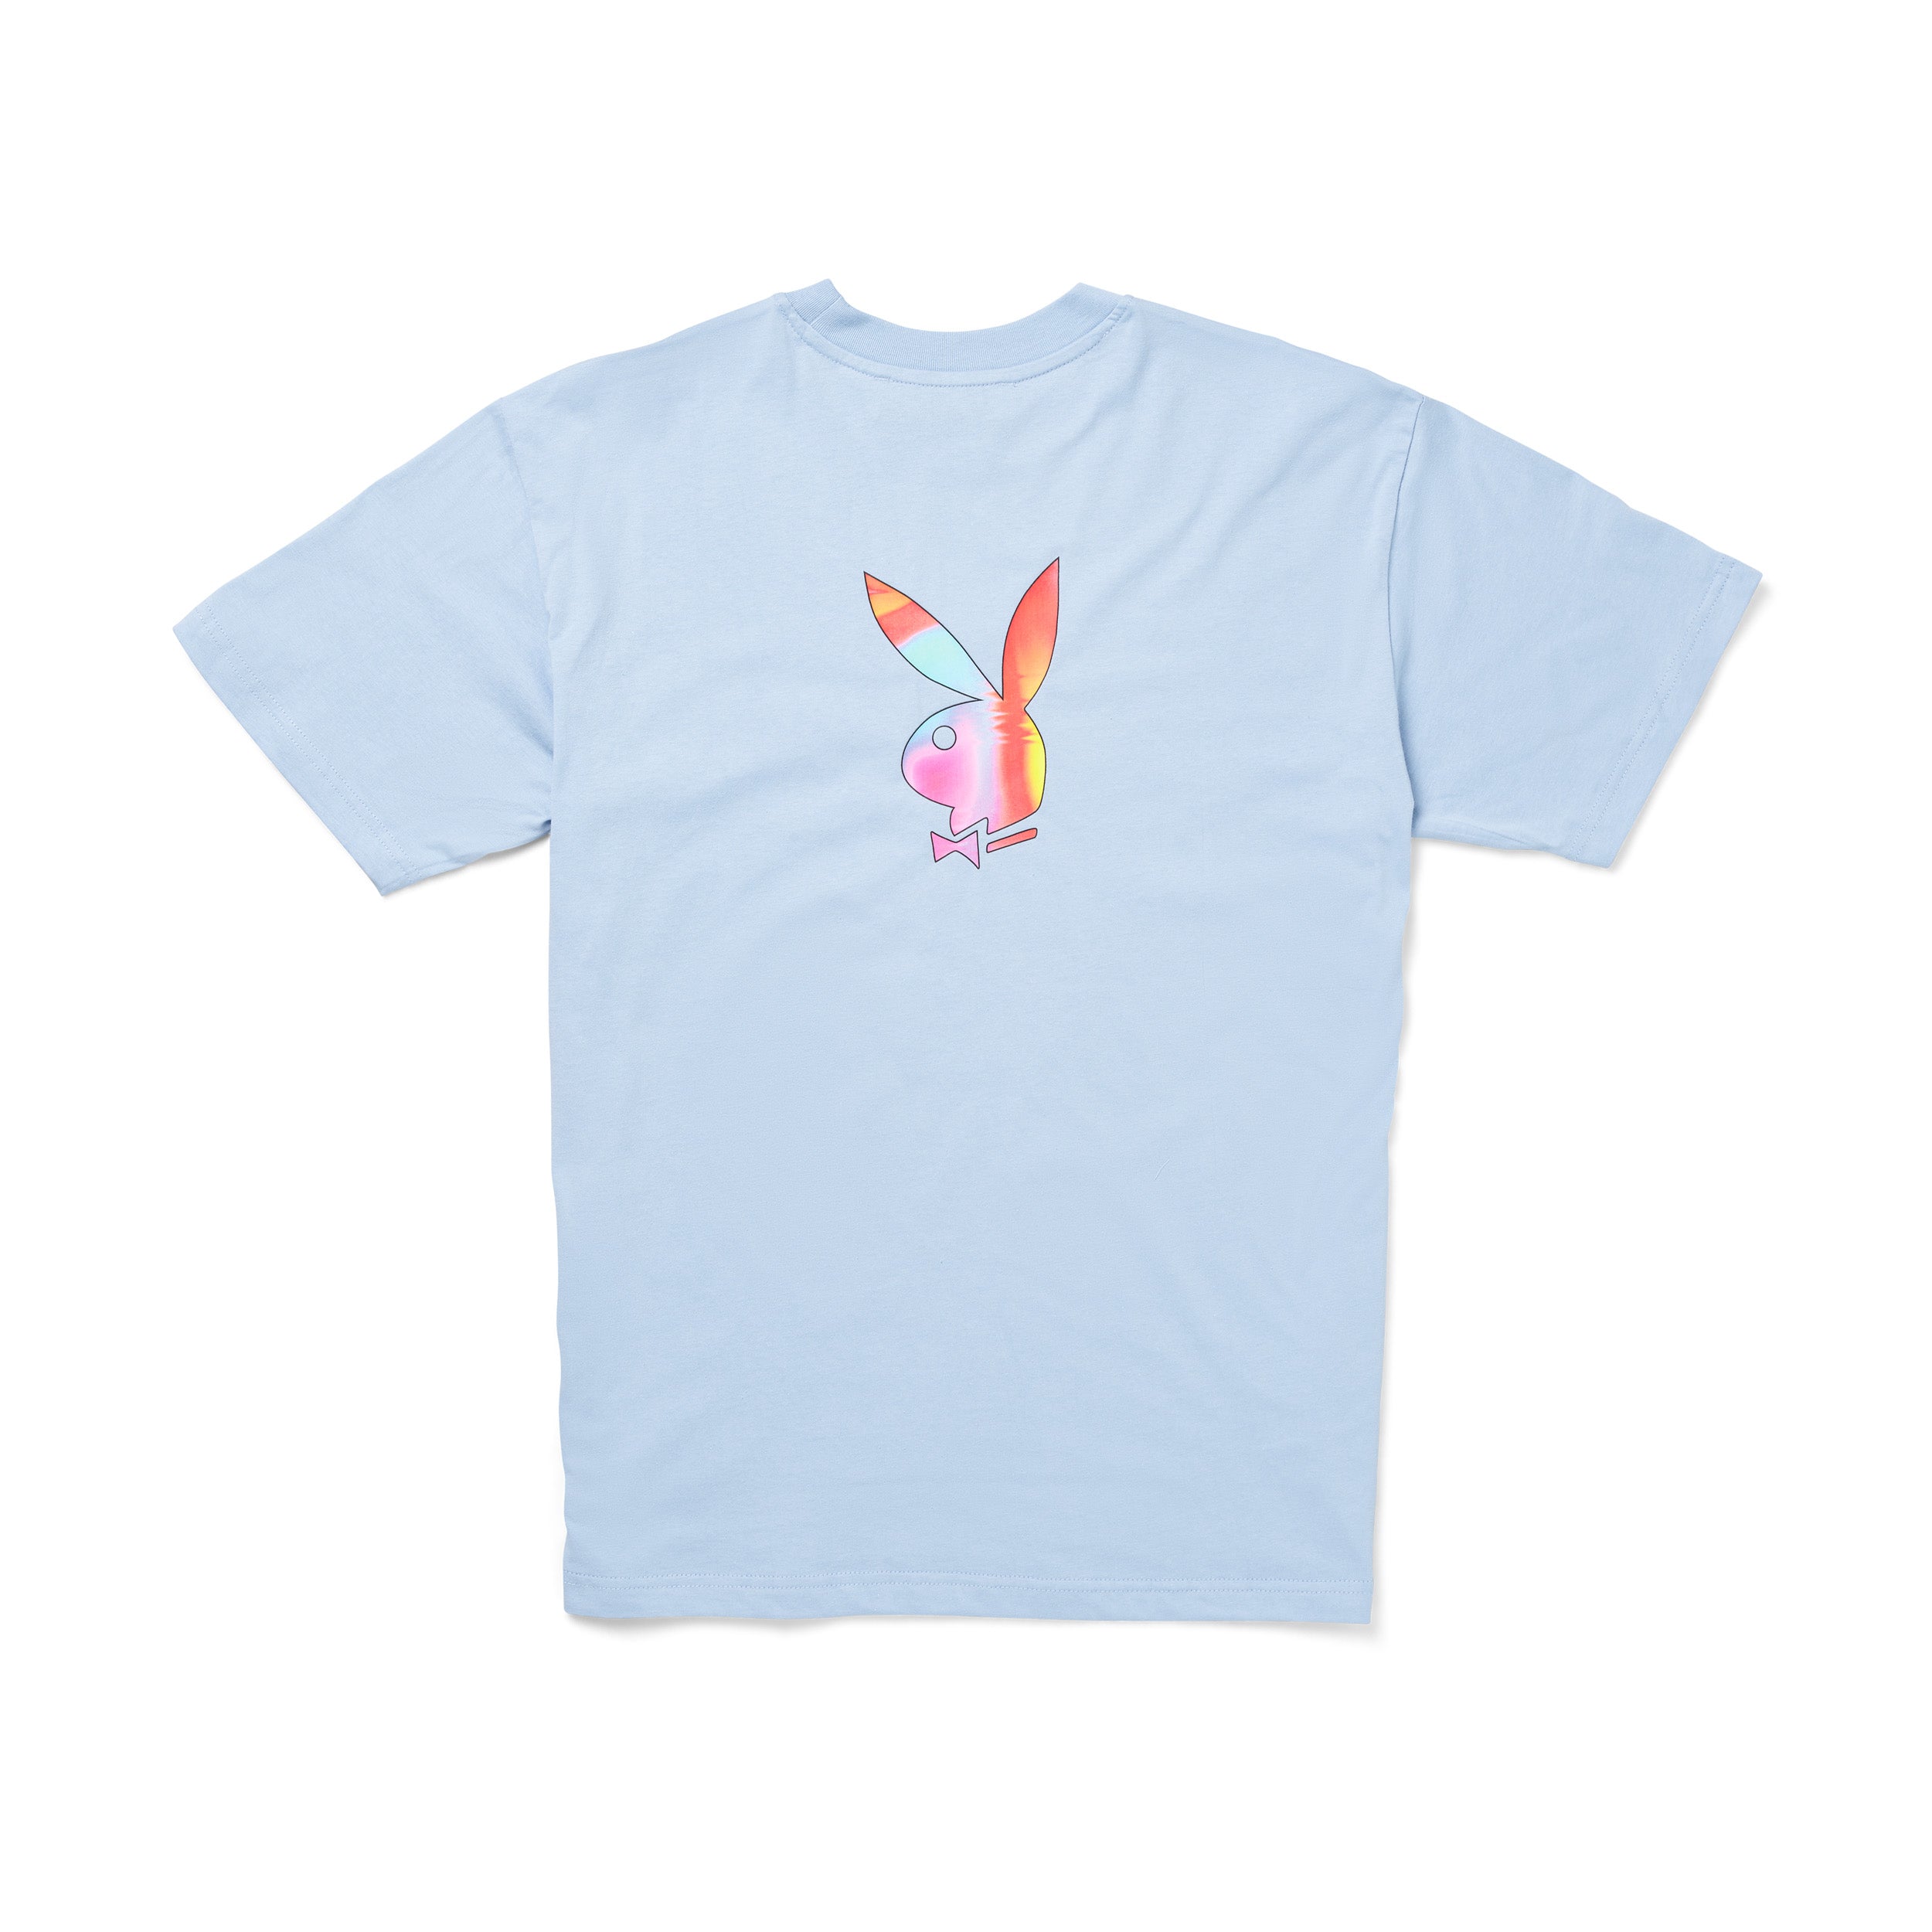 The Playboy T-Shirt: Official Playboy T-Shirts | Playboy.com – Page 8